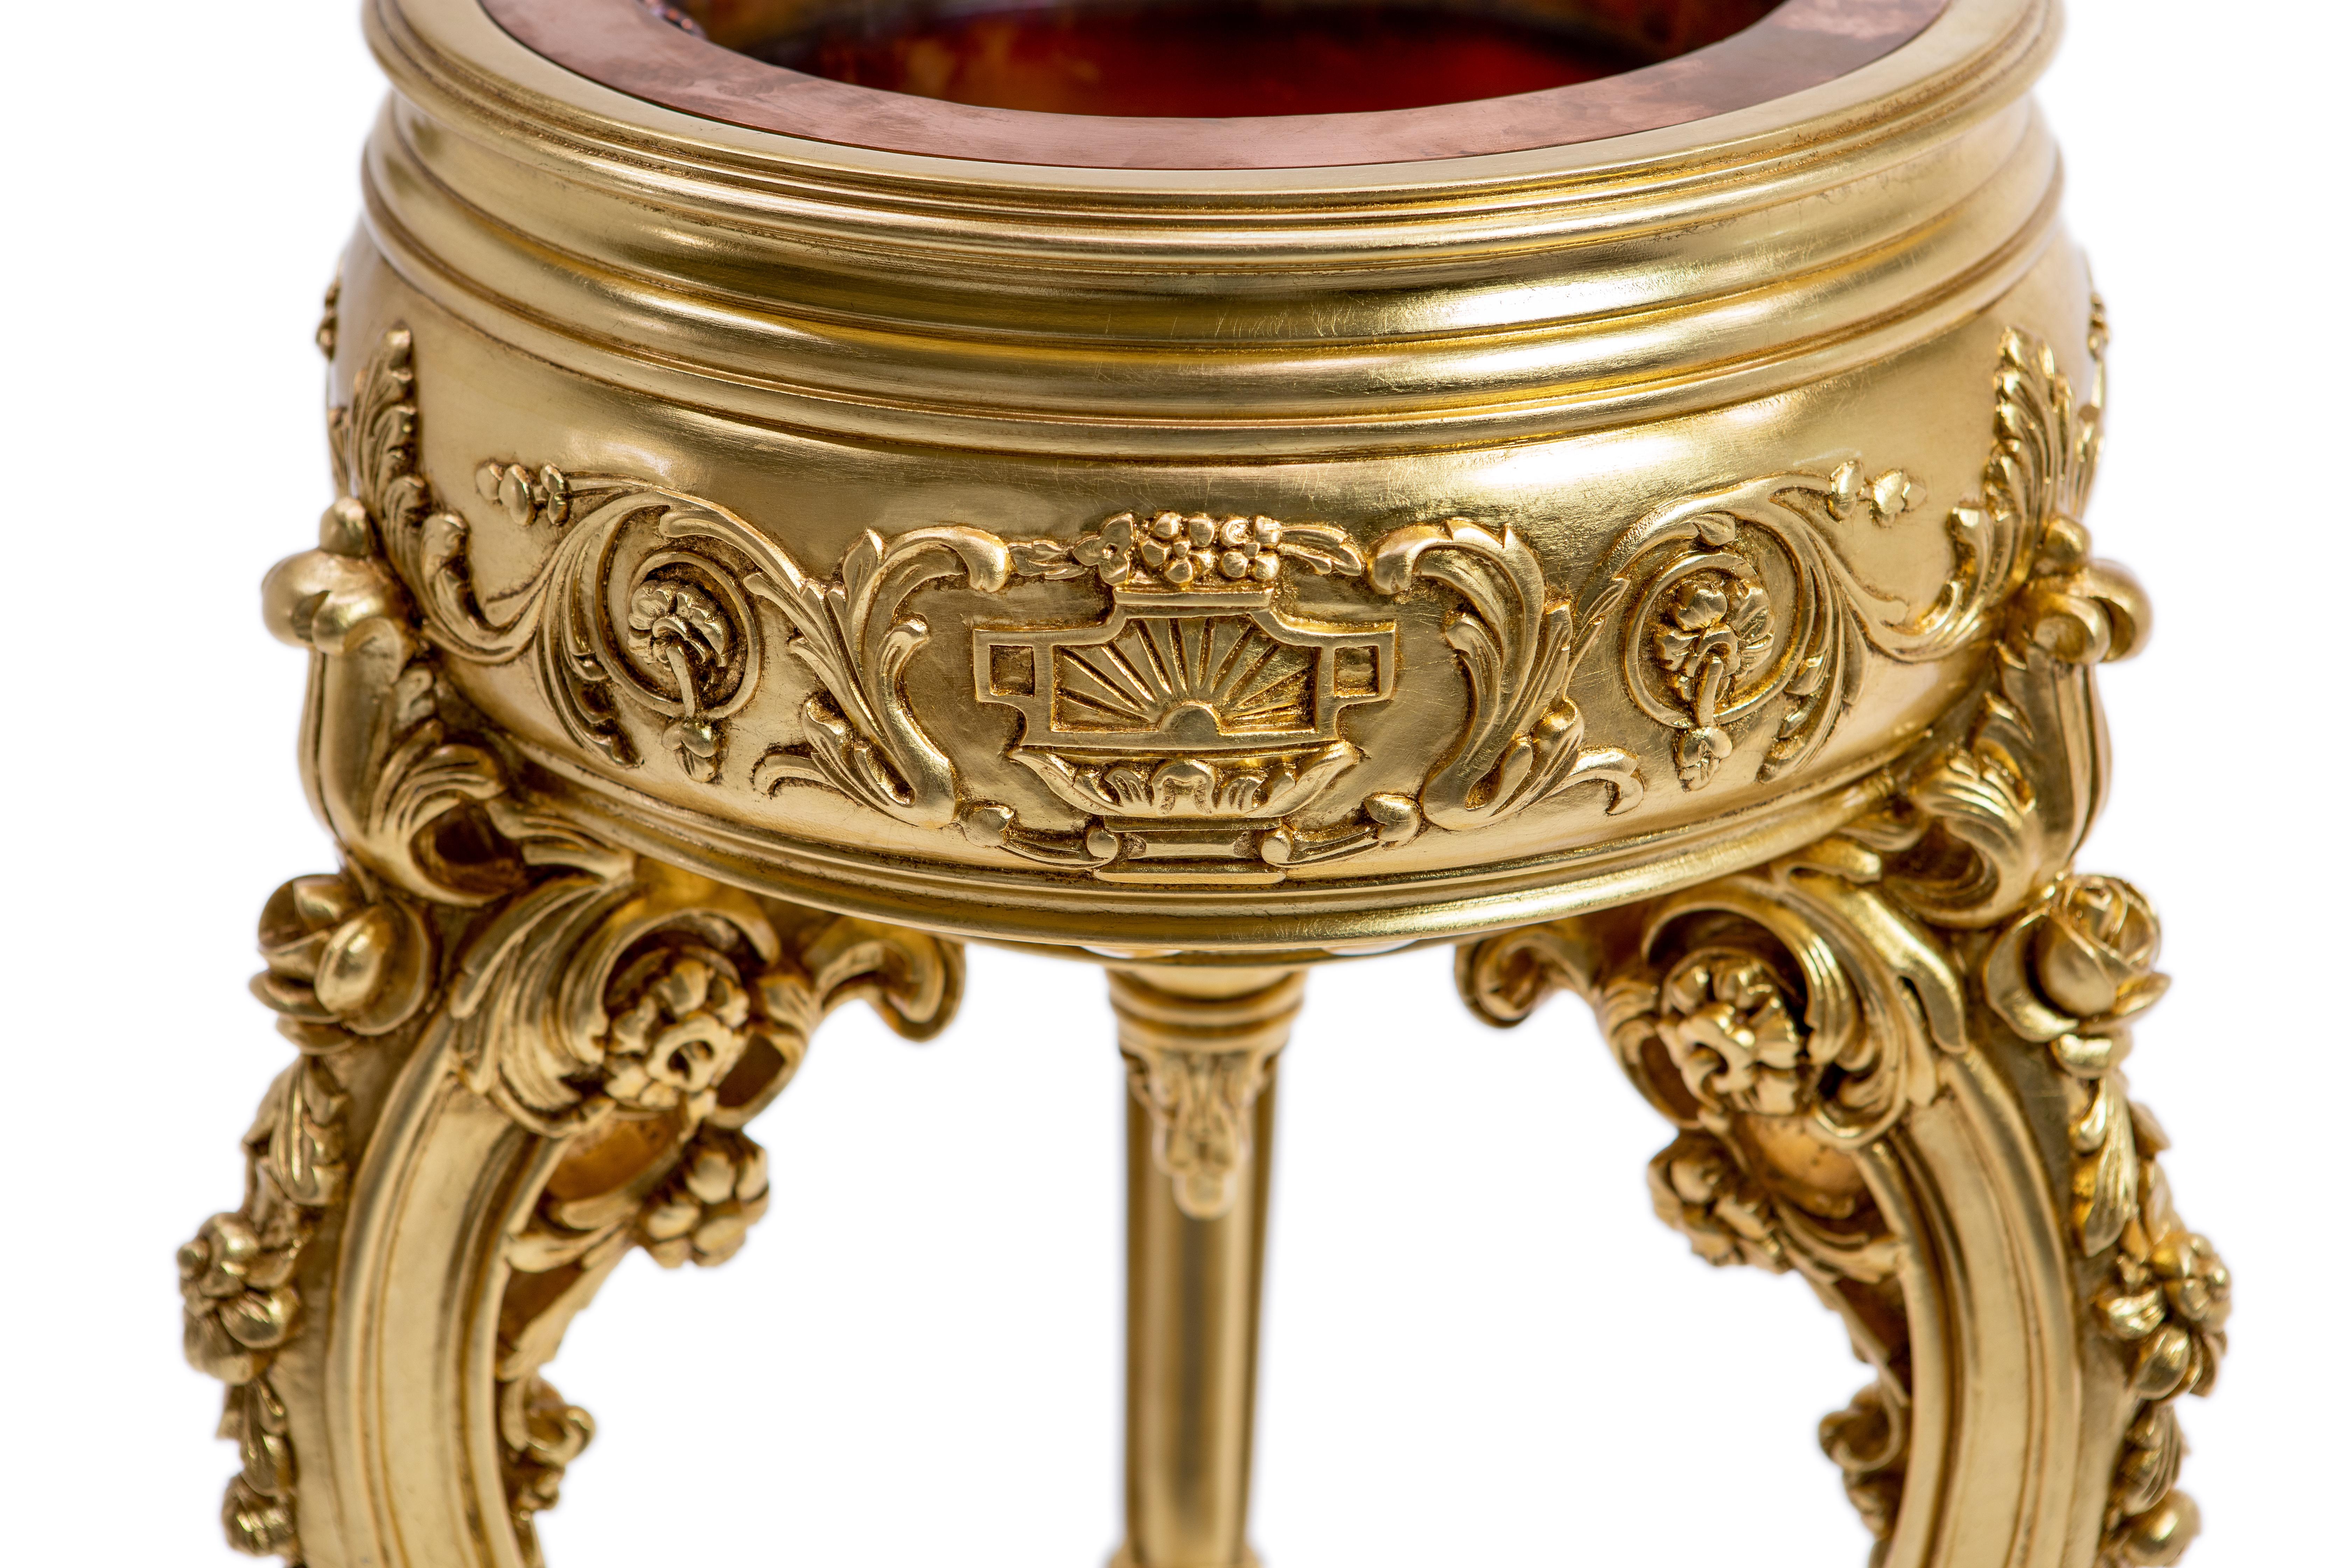 Stunning Baroque standvase. Wood frame finely handcarved. Round vase on top decorated whit carved floreal details. Copper vase inside to protect wood frame. The stand vase in photo is gold leaf finished ( 29/04 belloni gold finishing), but it is